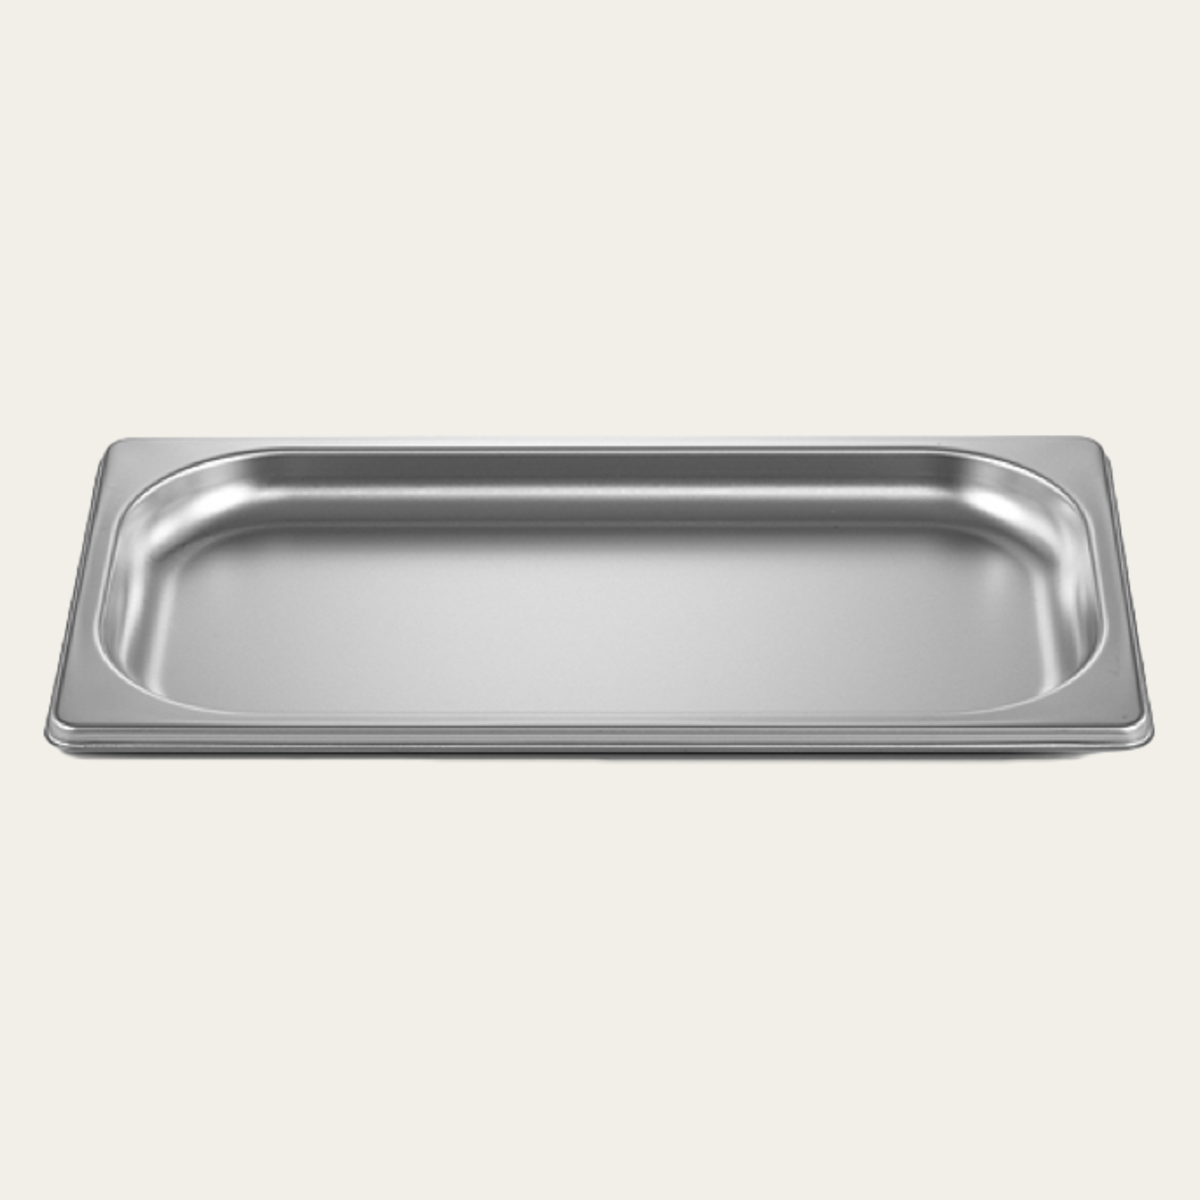 Stainless steel tray GN1/3, height 20mm, unperforated, packed